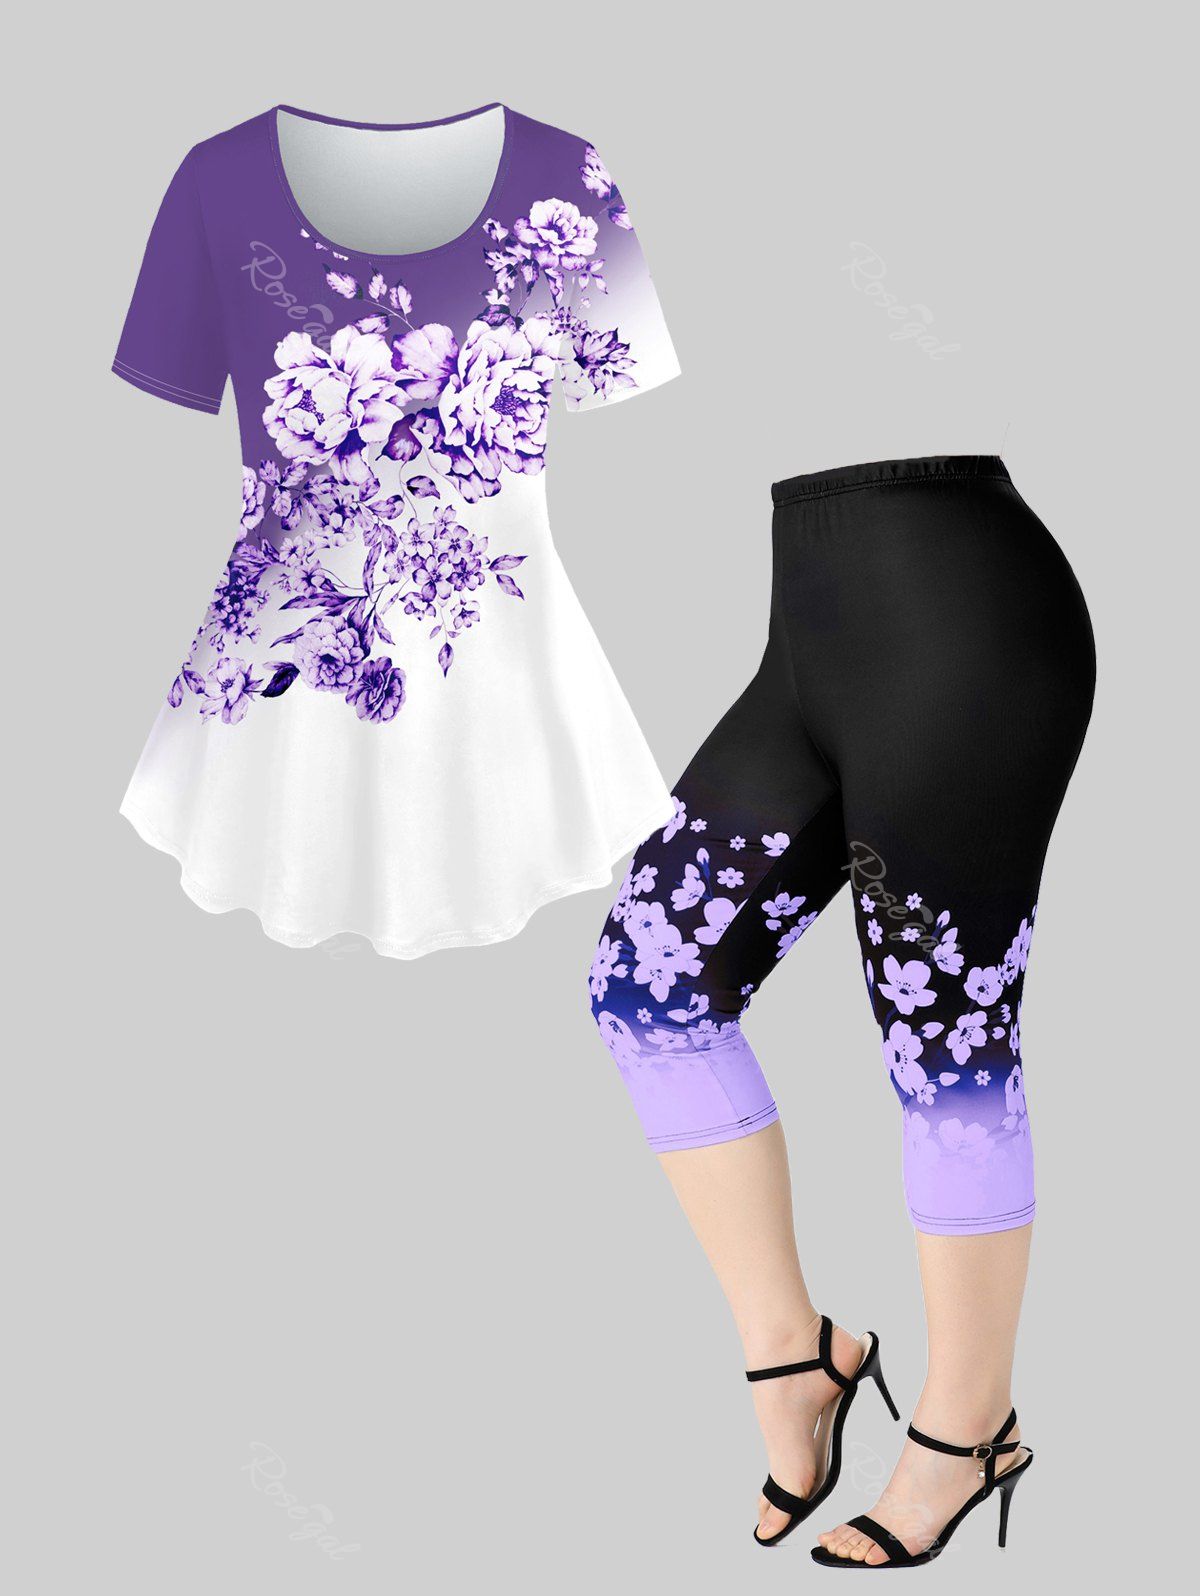 Sale Ombre Floral Print Short Sleeve Tee and Capri Leggings Plus Size Summer Outfit  